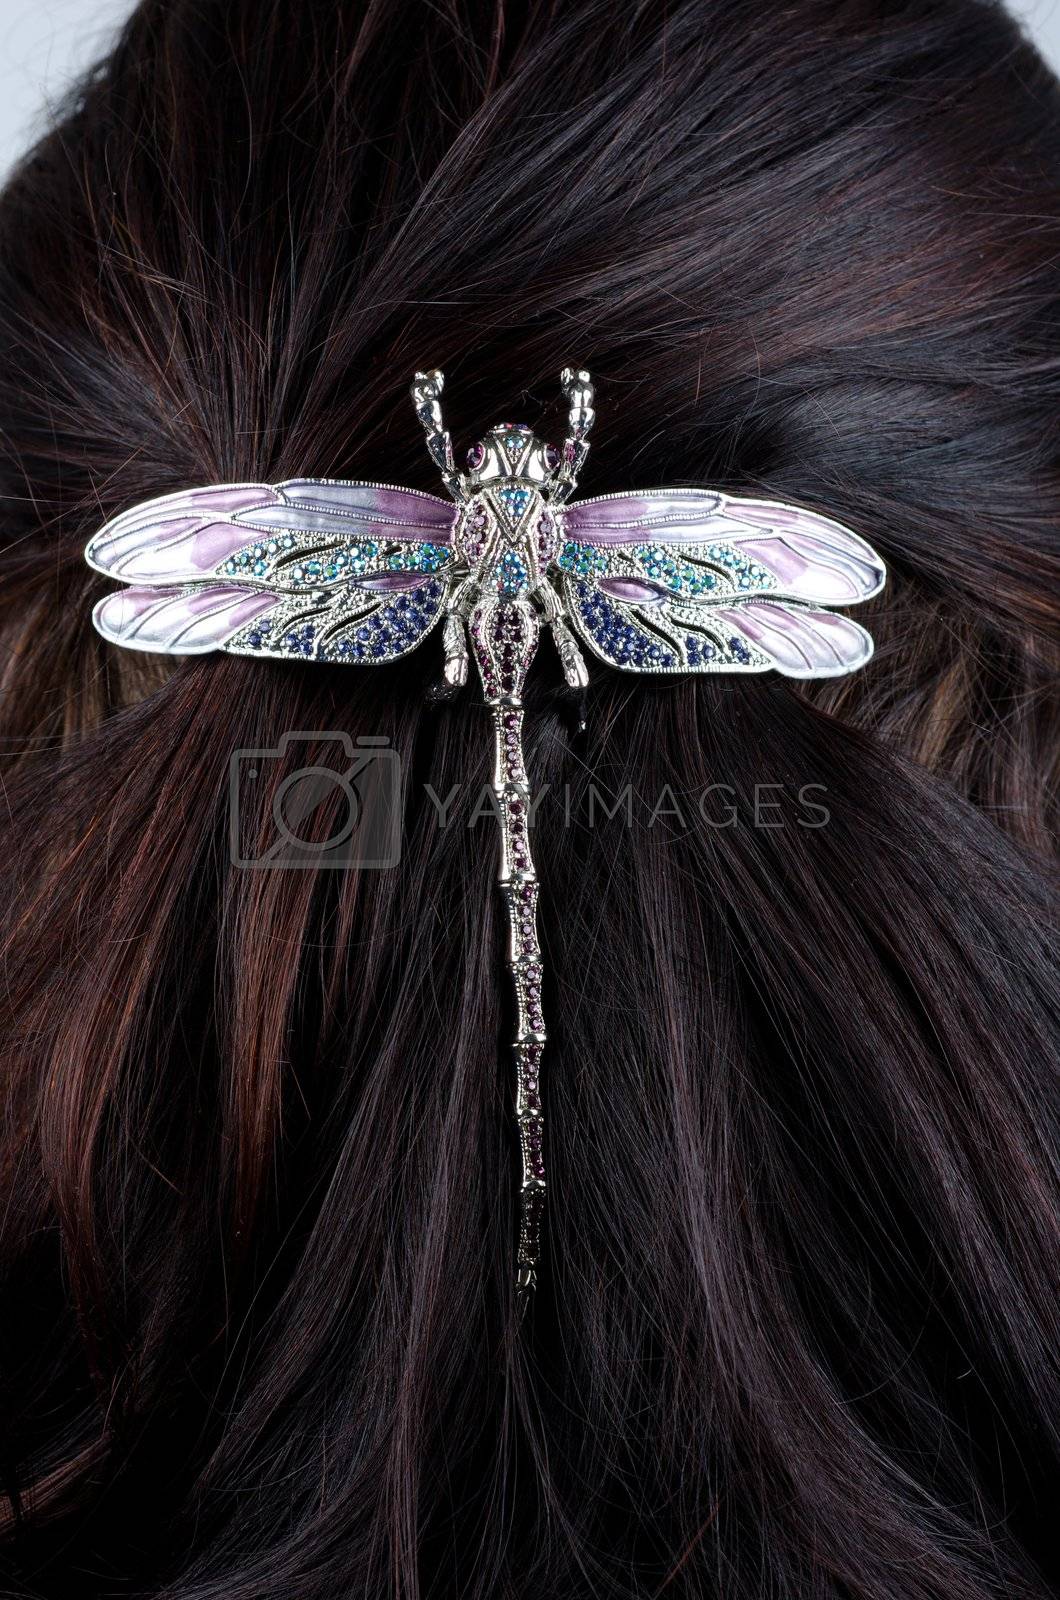 Royalty free image of coiffure by rusak